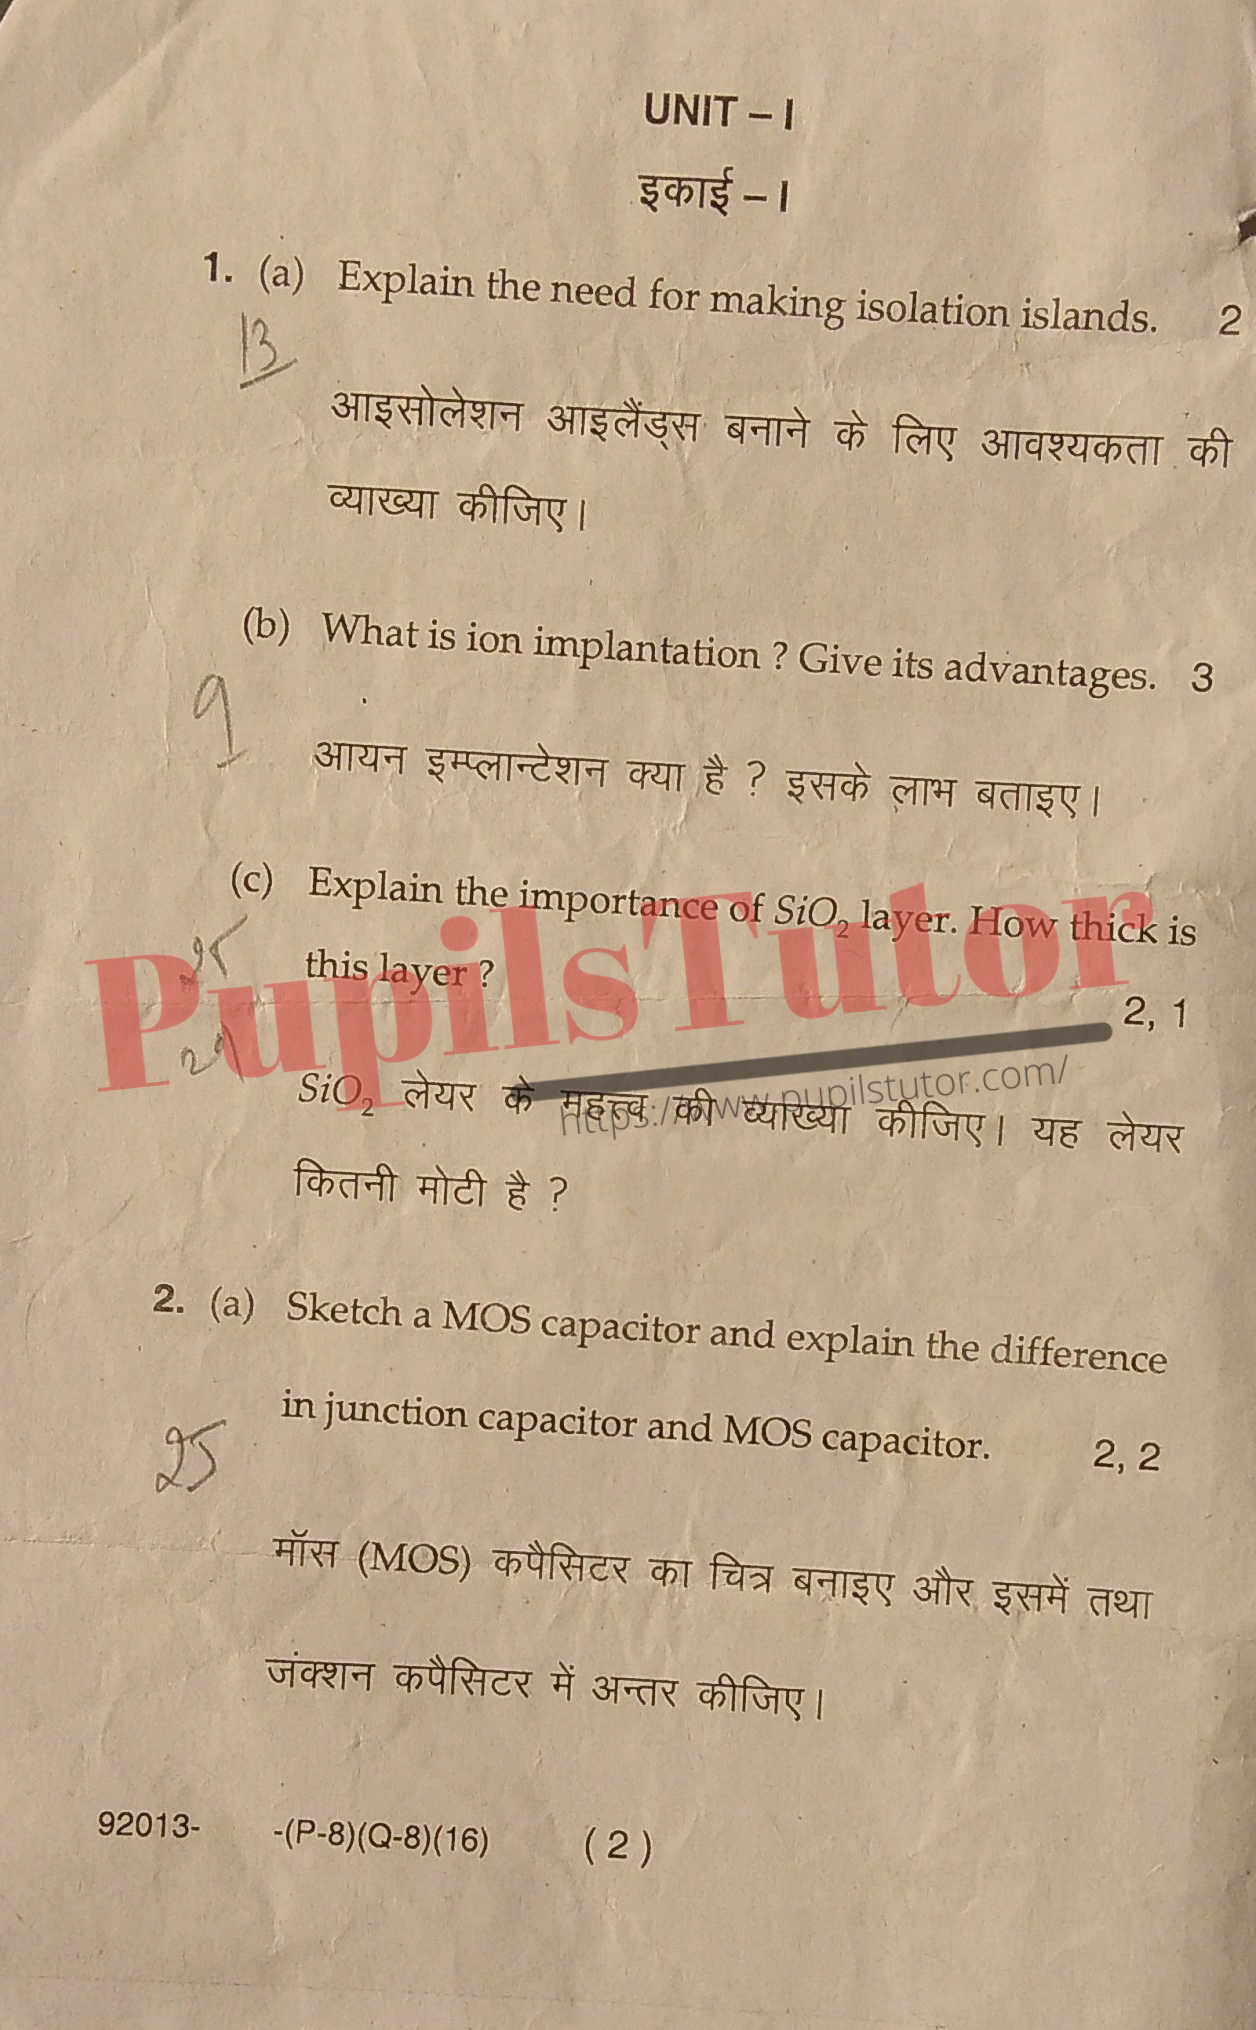 M.D. University B.Sc. [Electronics] Devices And Circuits Third Semester Important Question Answer And Solution - www.pupilstutor.com (Paper Page Number 2)